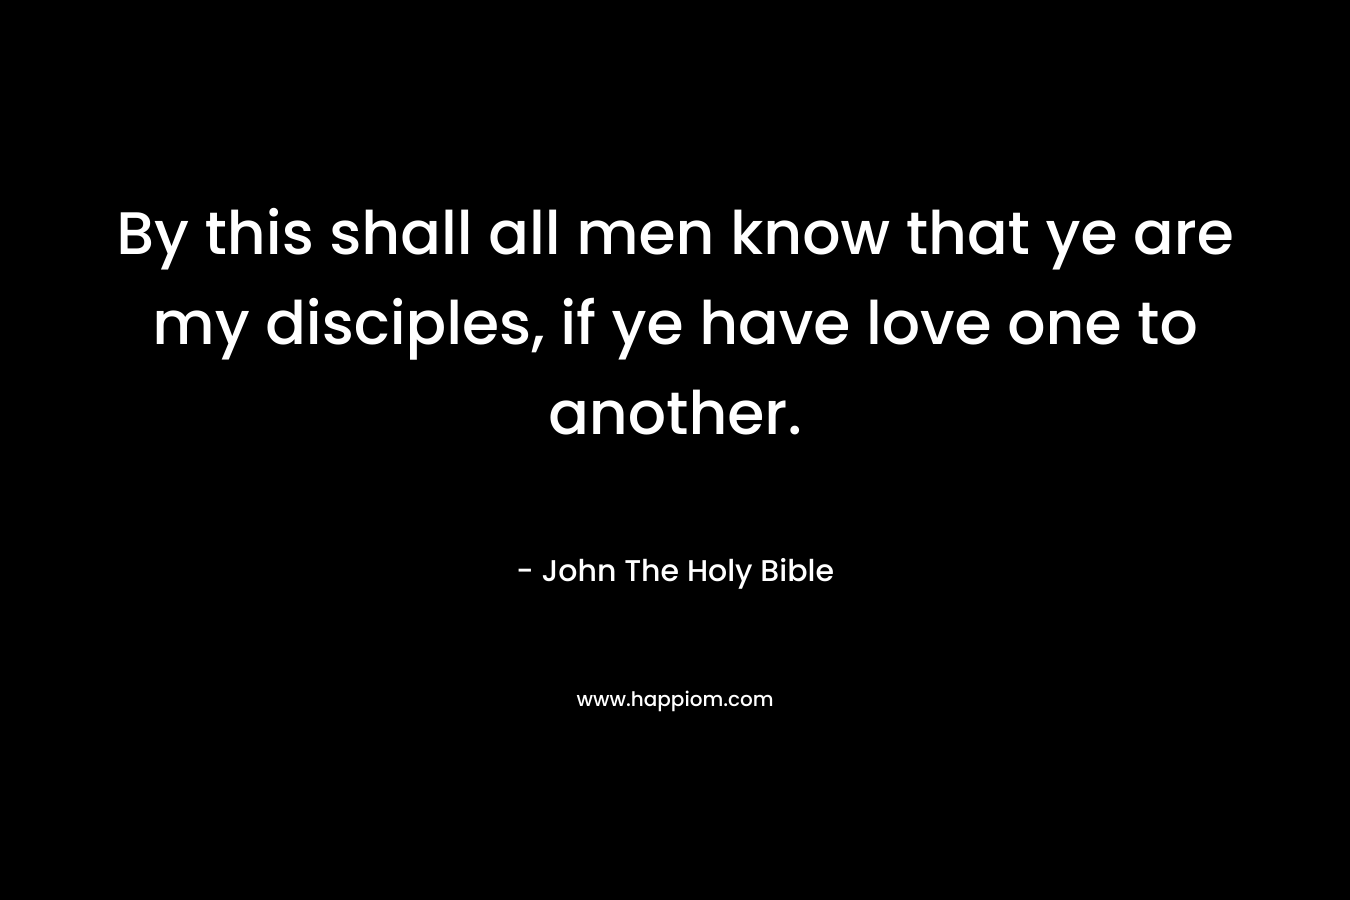 By this shall all men know that ye are my disciples, if ye have love one to another.